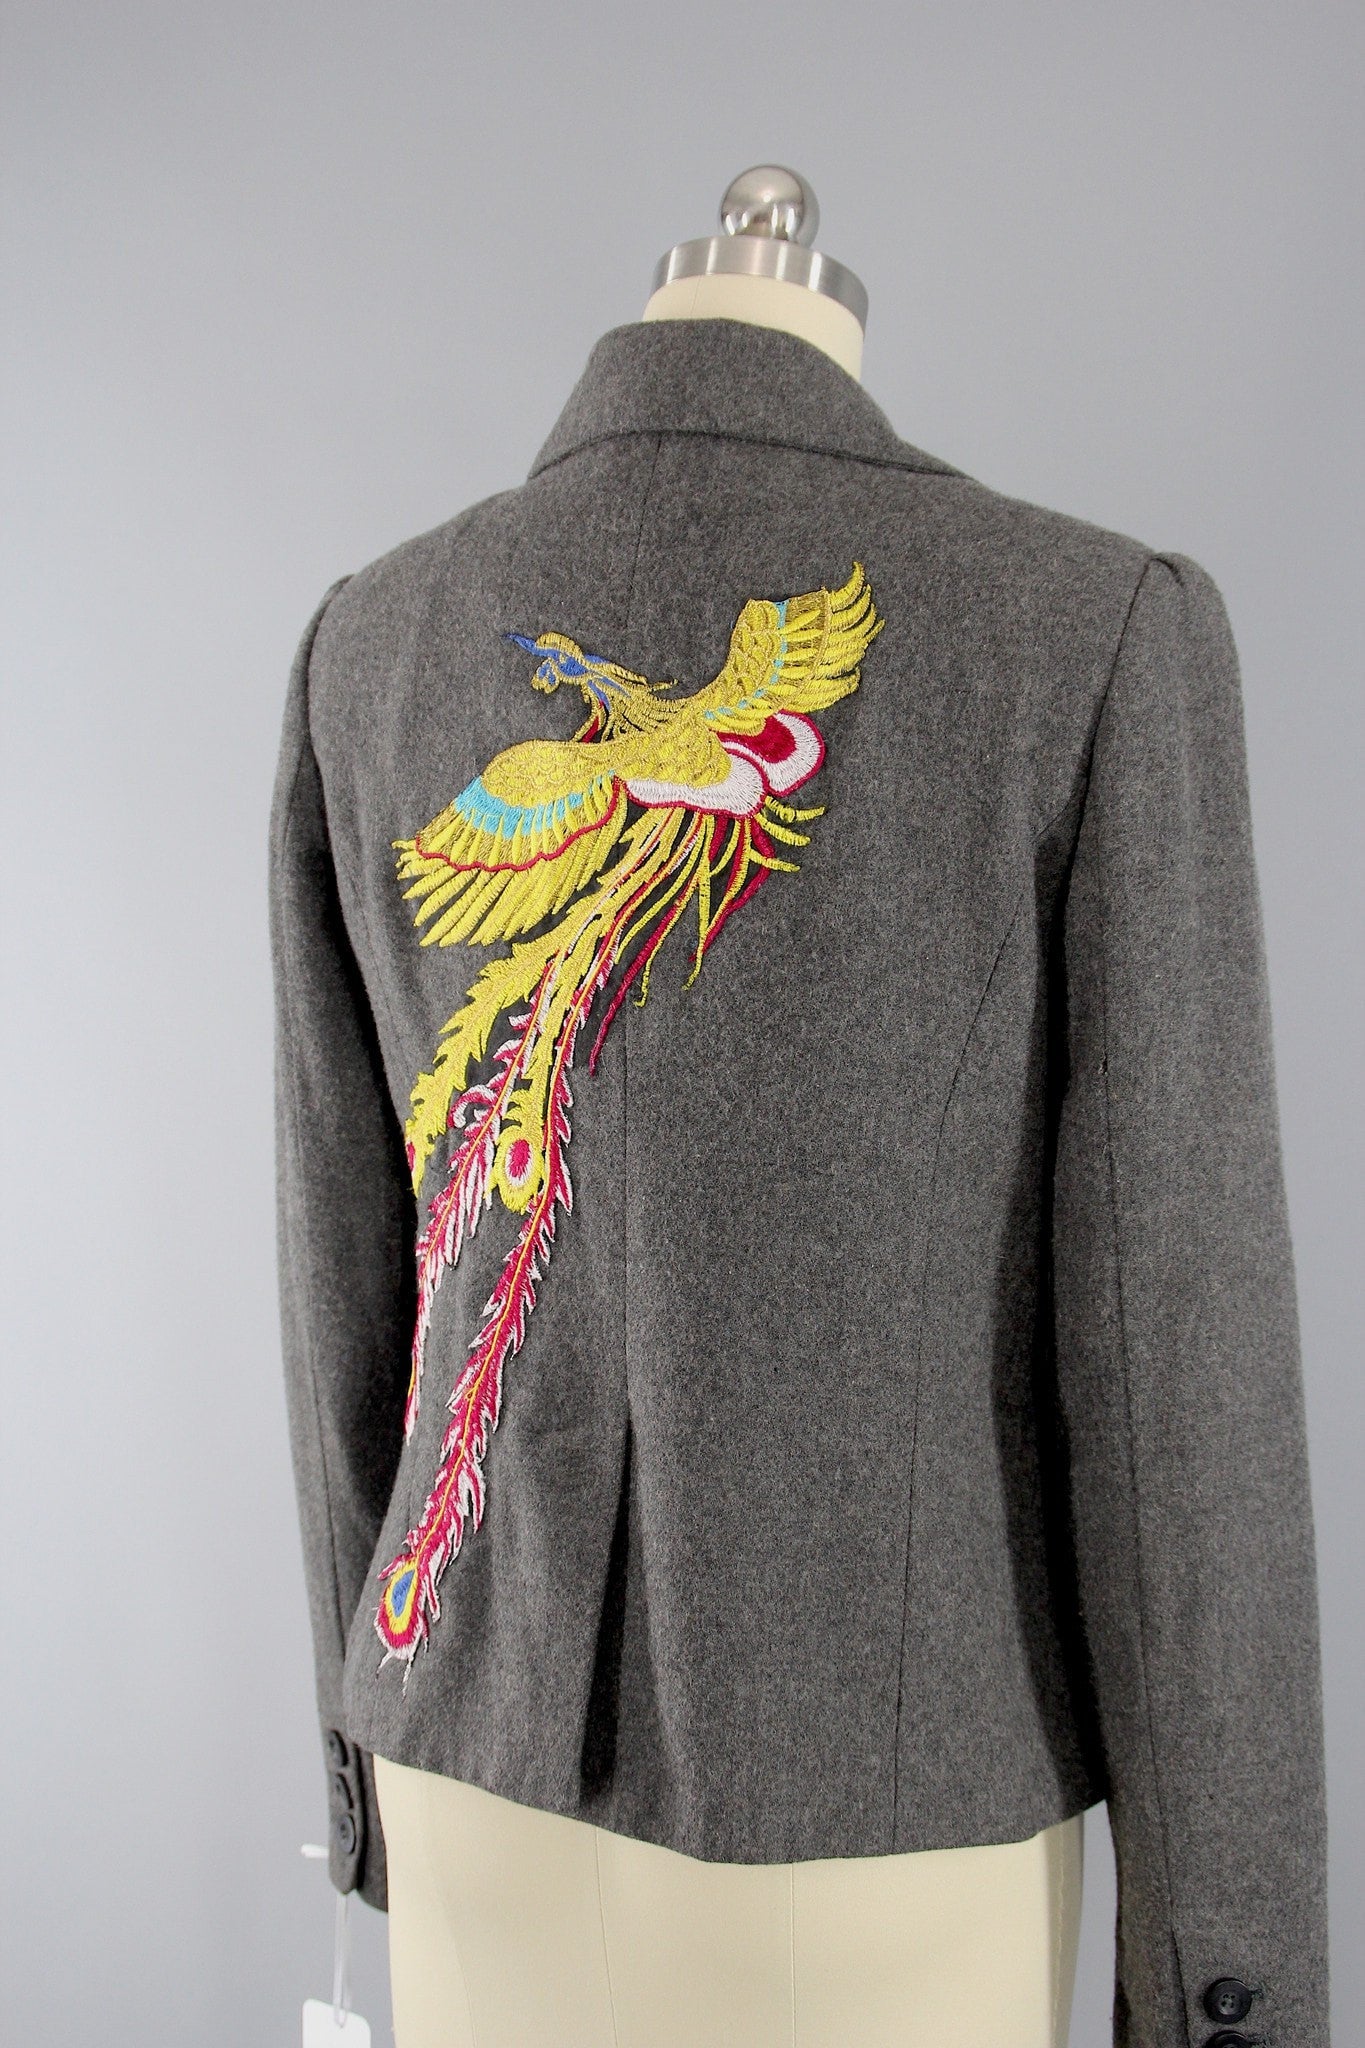 Grey Wool Women's Jacket with PHOENIX Embroidery - ThisBlueBird